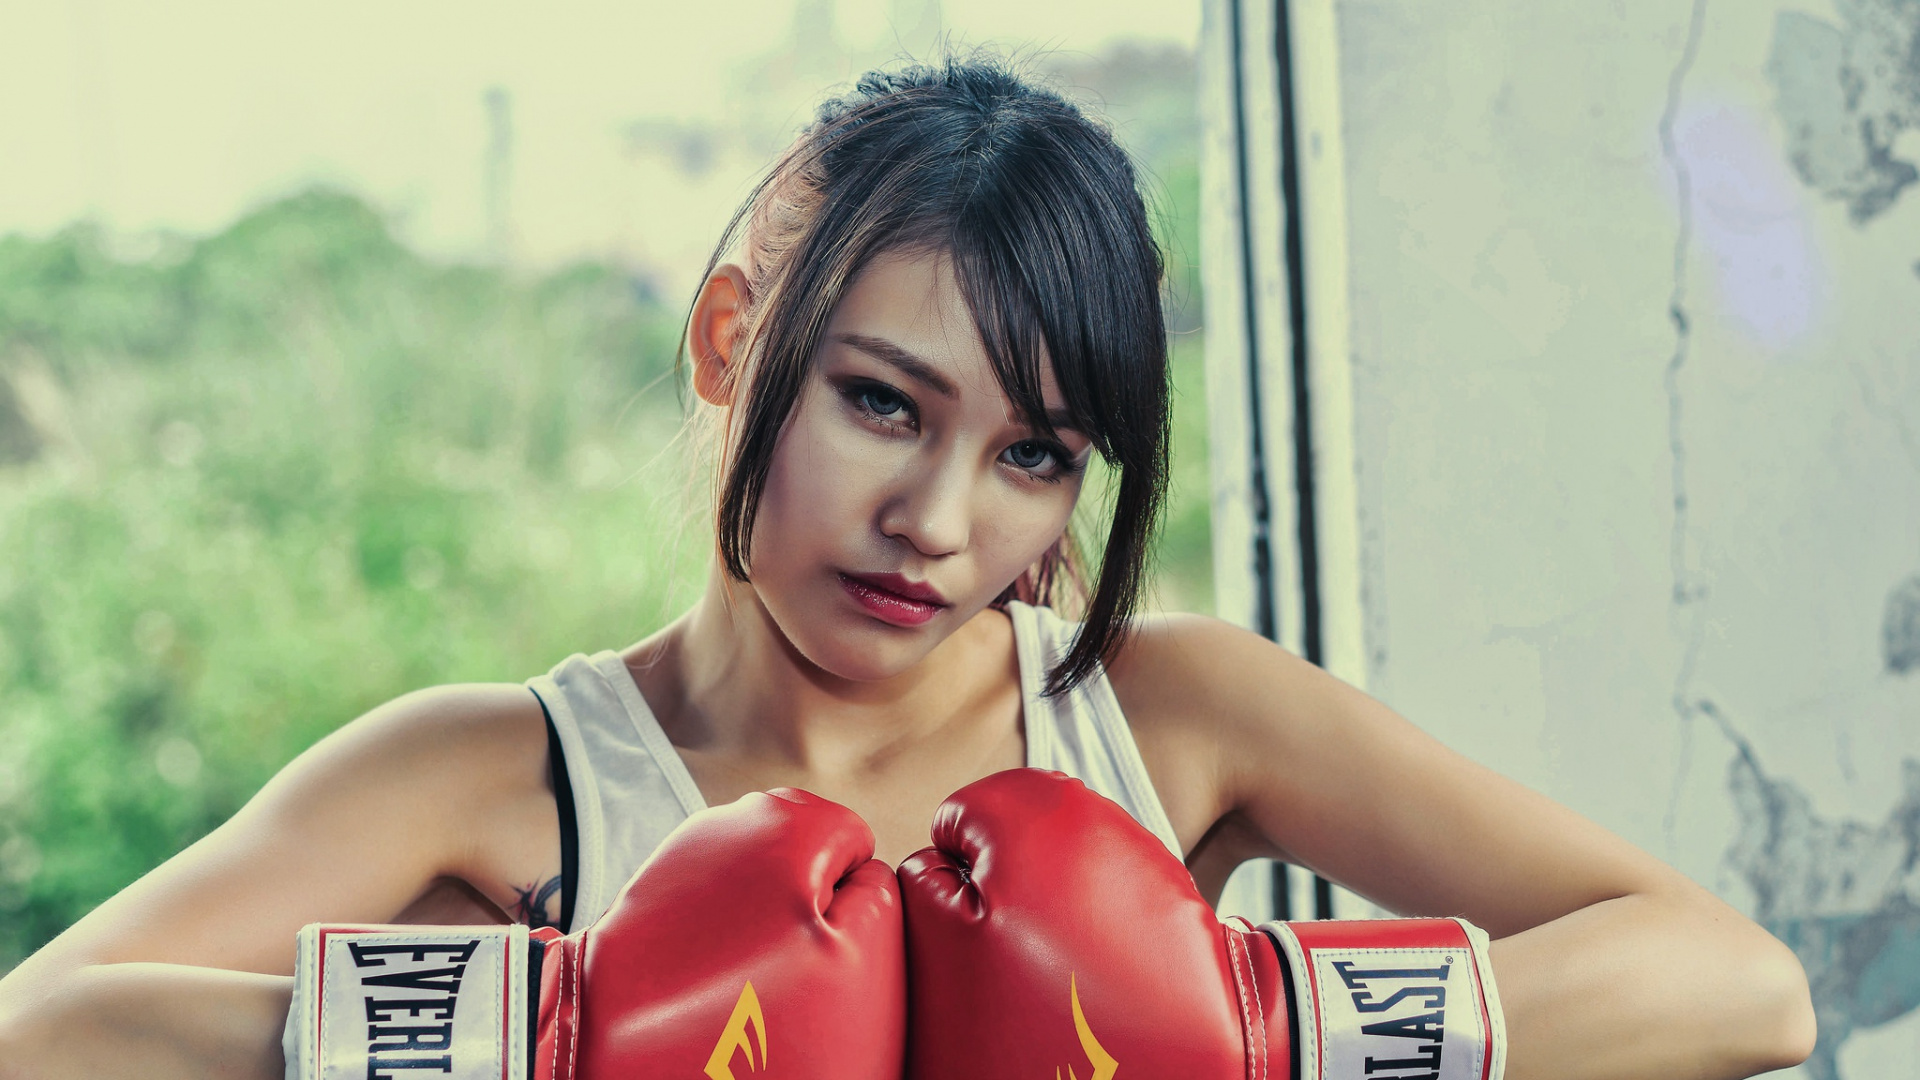 Woman in Red Boxing Gloves. Wallpaper in 1920x1080 Resolution